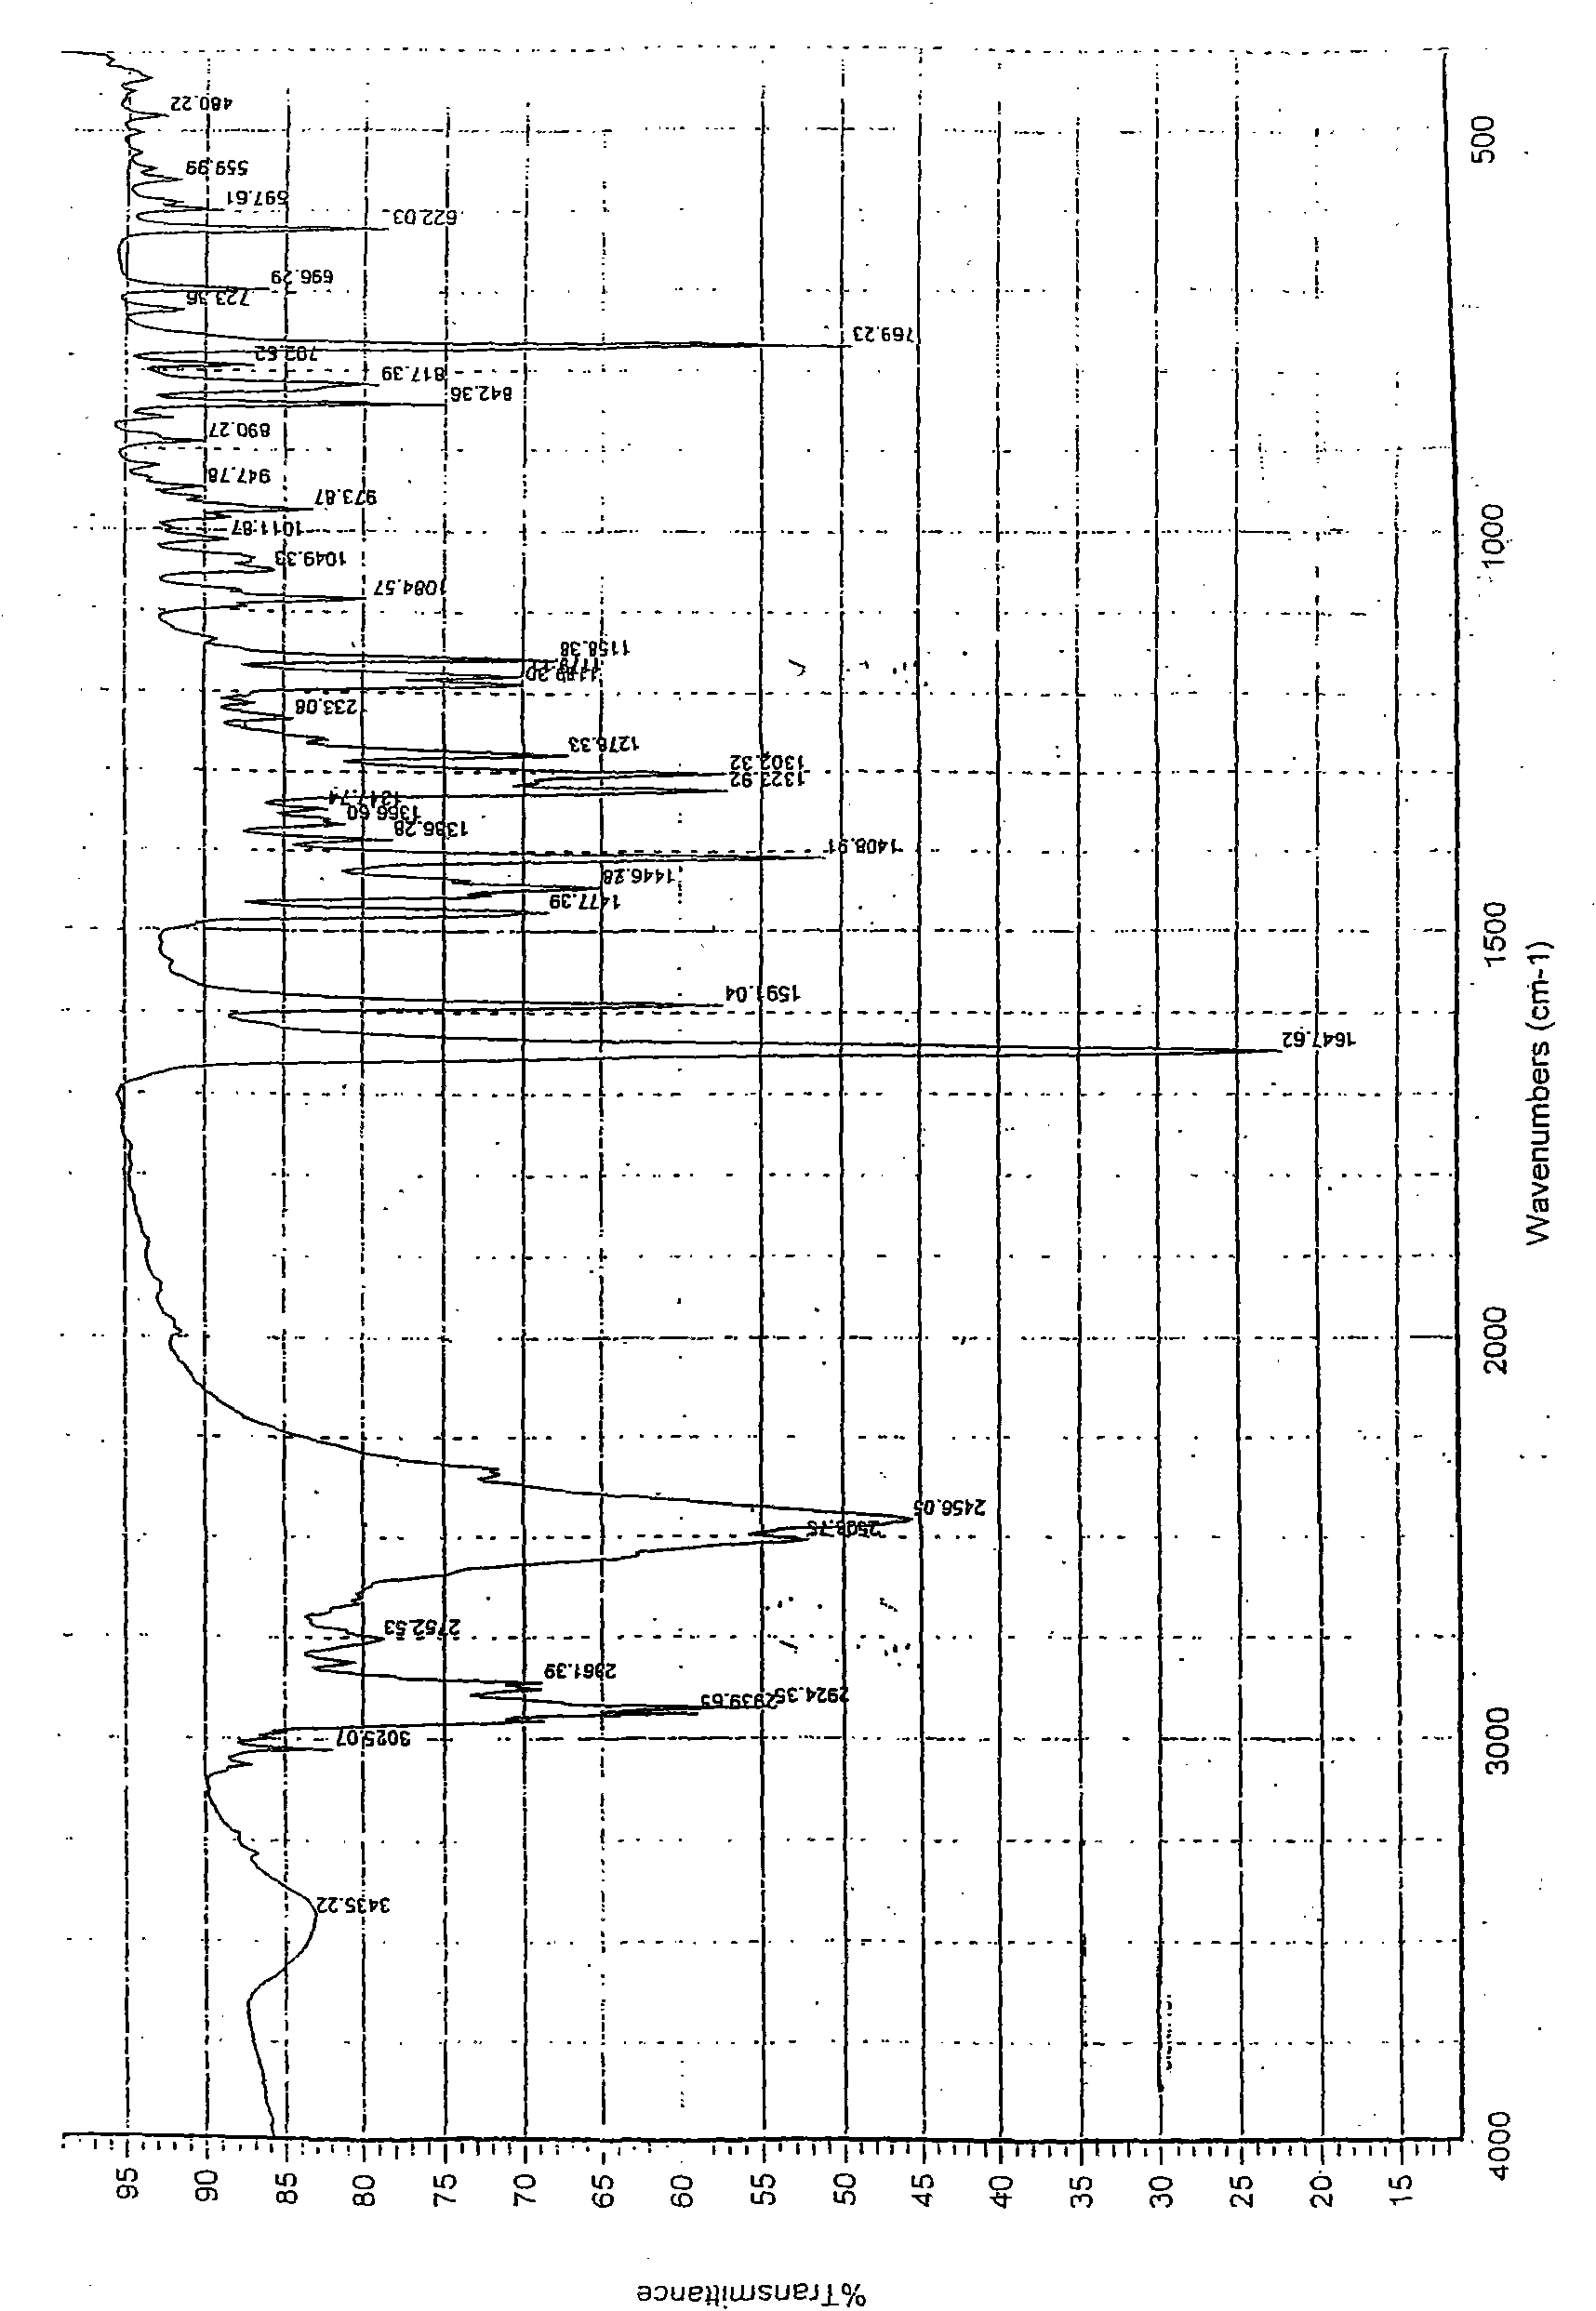 Crystal forms of palonosetron hydrochloride and preparation method thereof